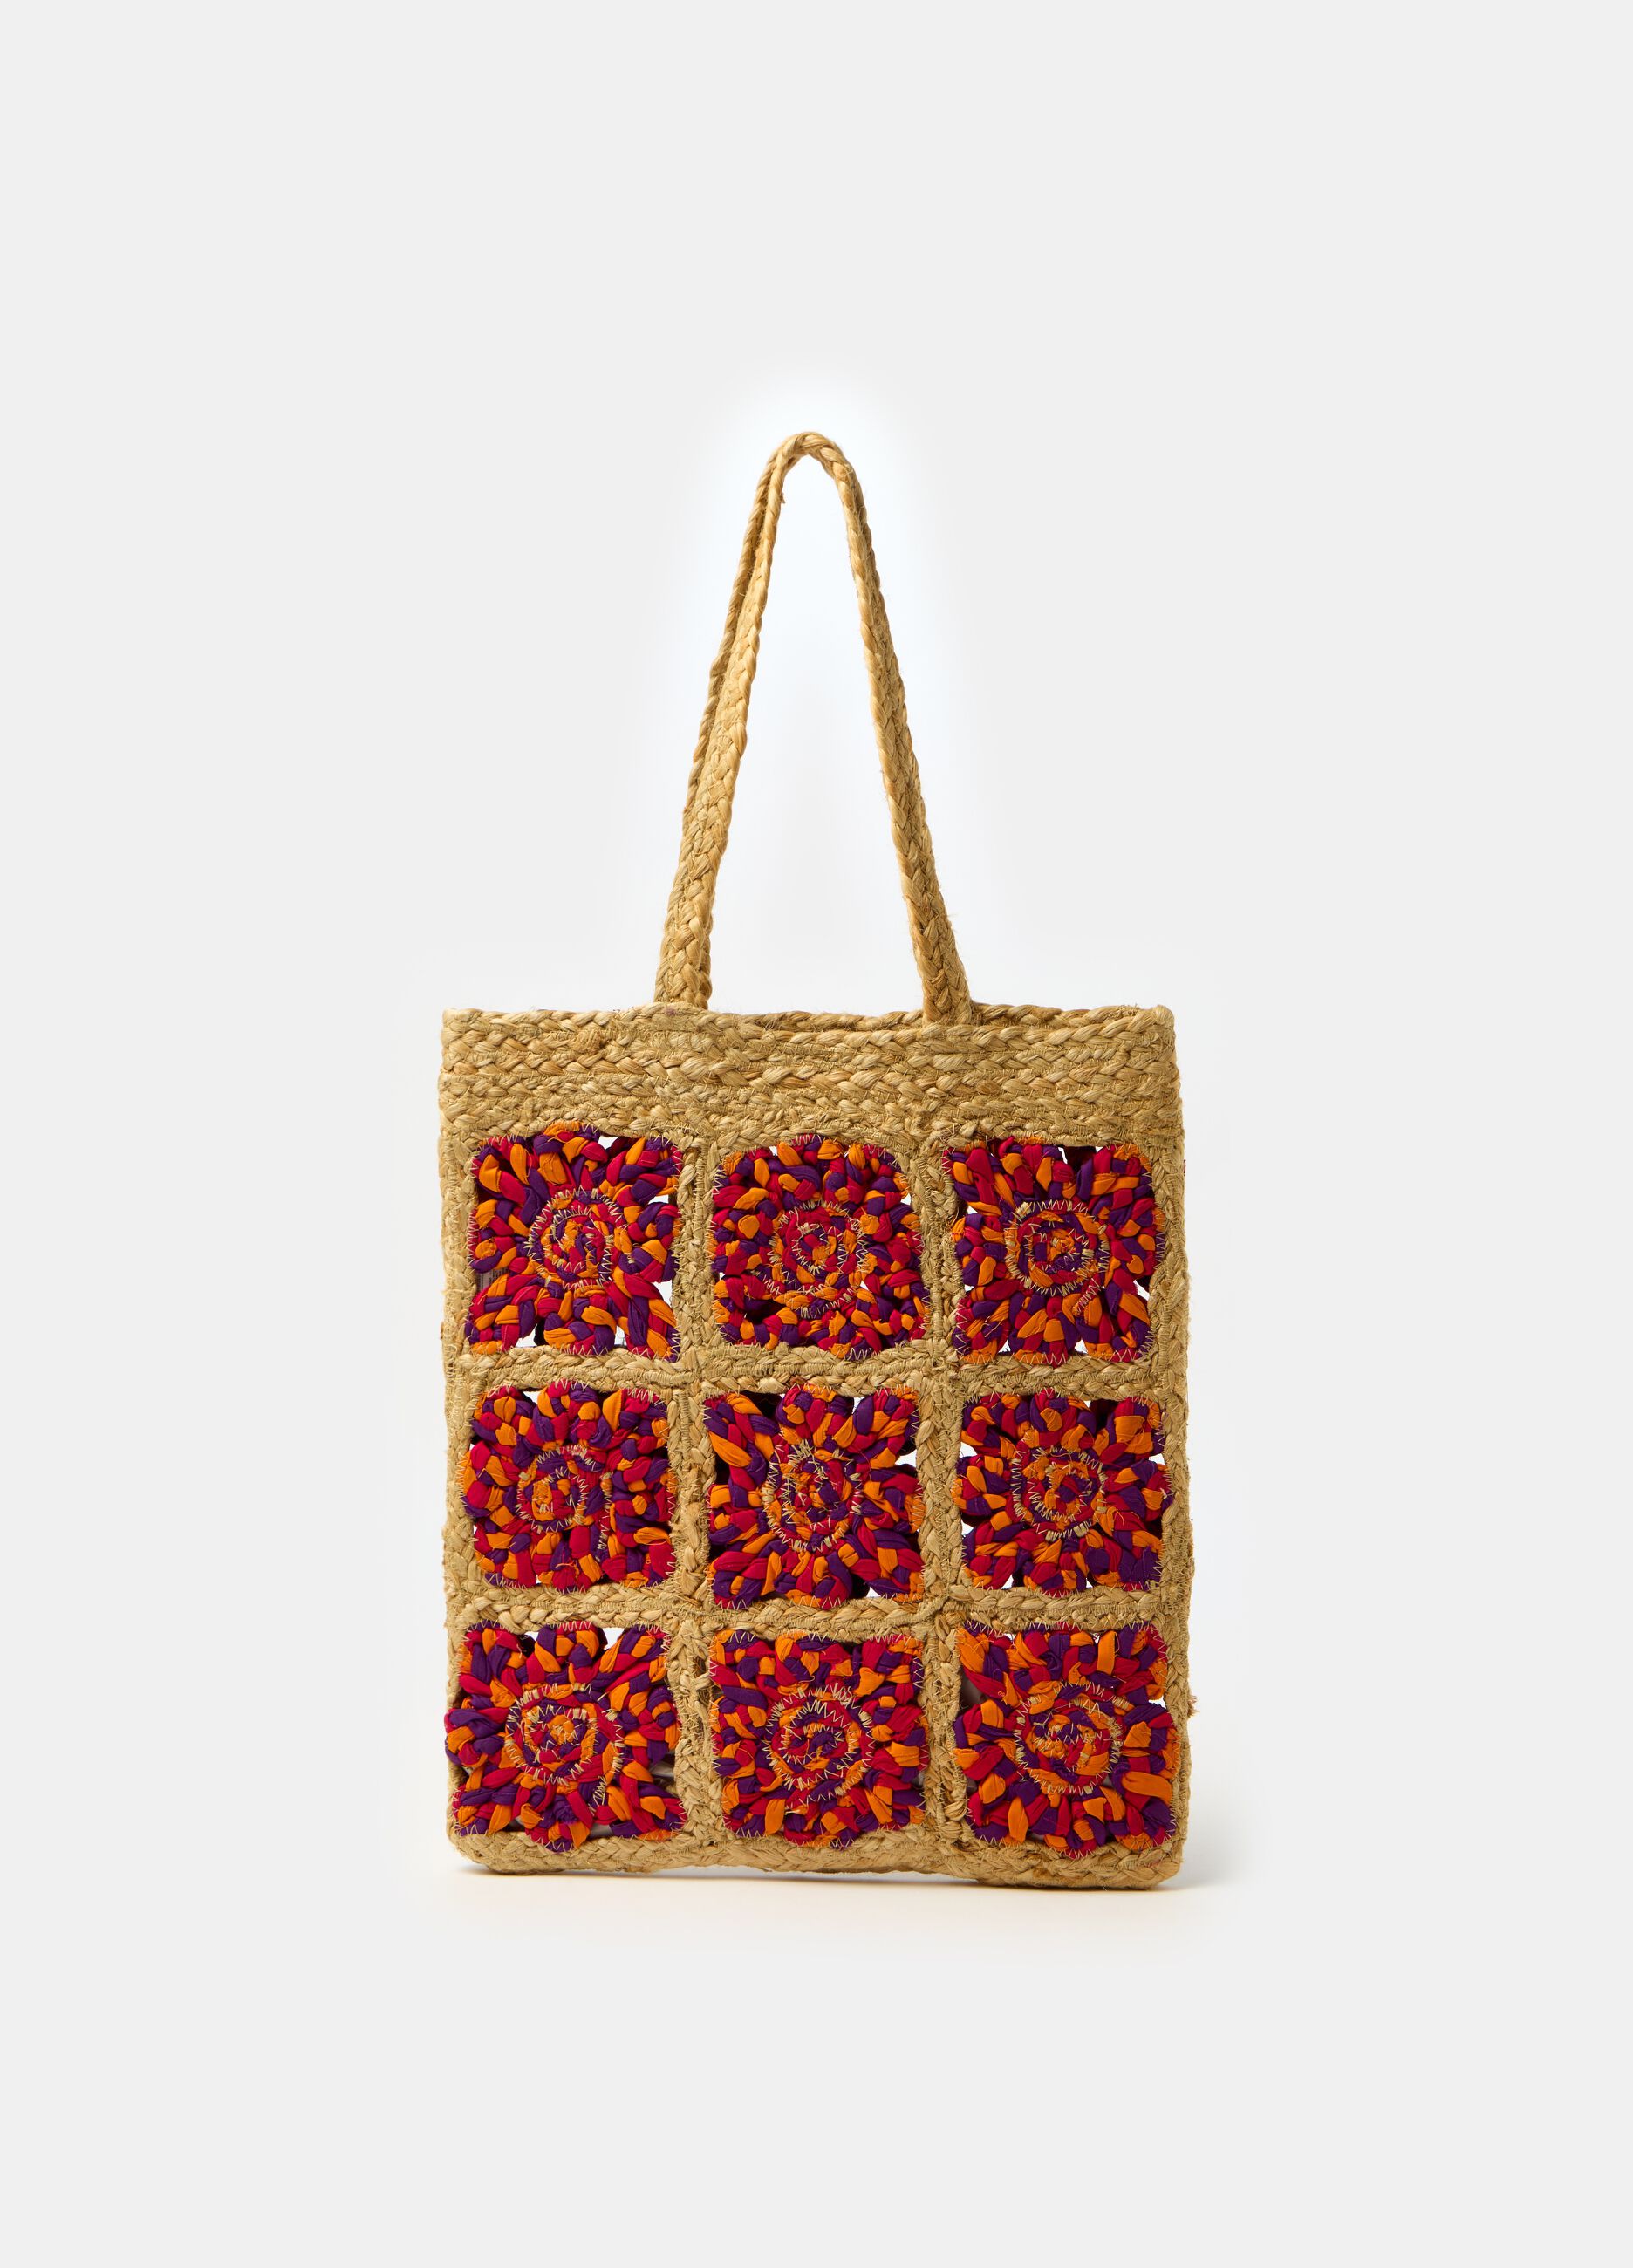 Straw bag with fabric inserts